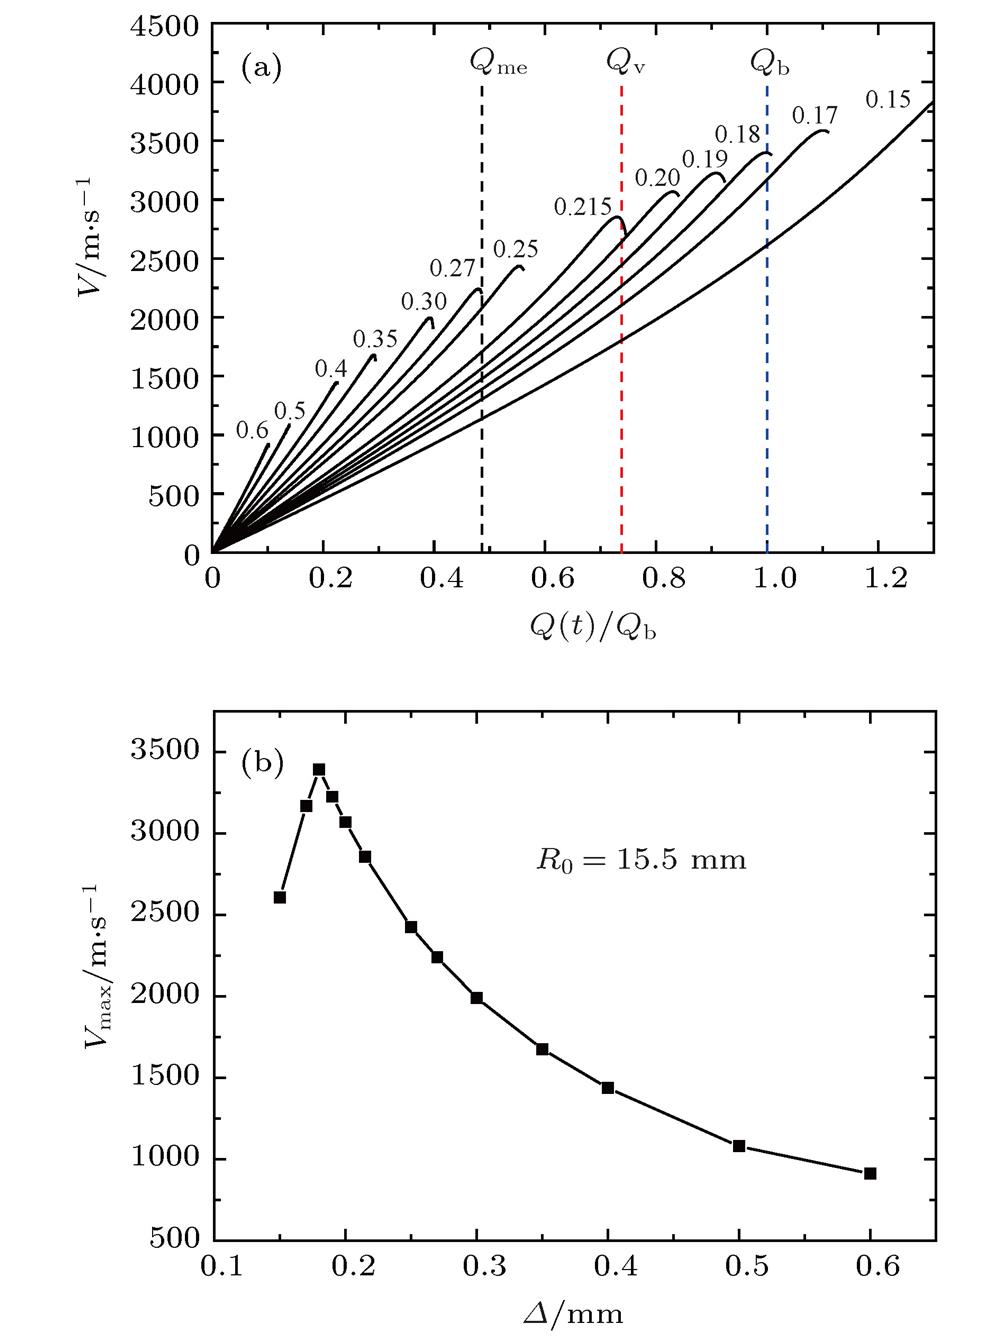 (a) The relationship between outer surface velocity and electrical action with various liner thicknesses; (b) the change of outer surface velocity with the liner thickness for initial outer radius R0 = 15.5 mm.